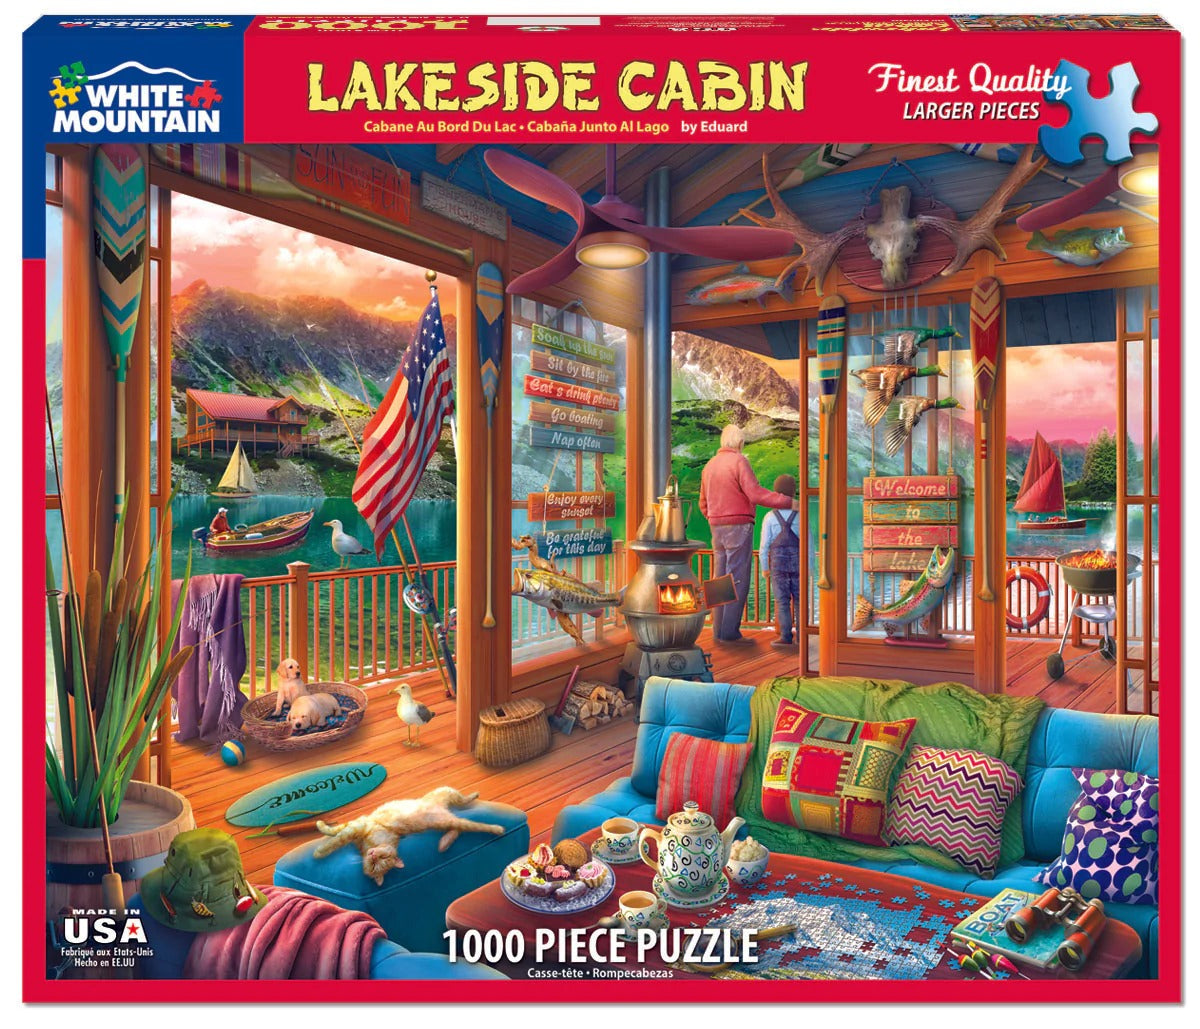 Lakeside Cabin 1000 Piece Jigsaw Puzzle by White Mountain